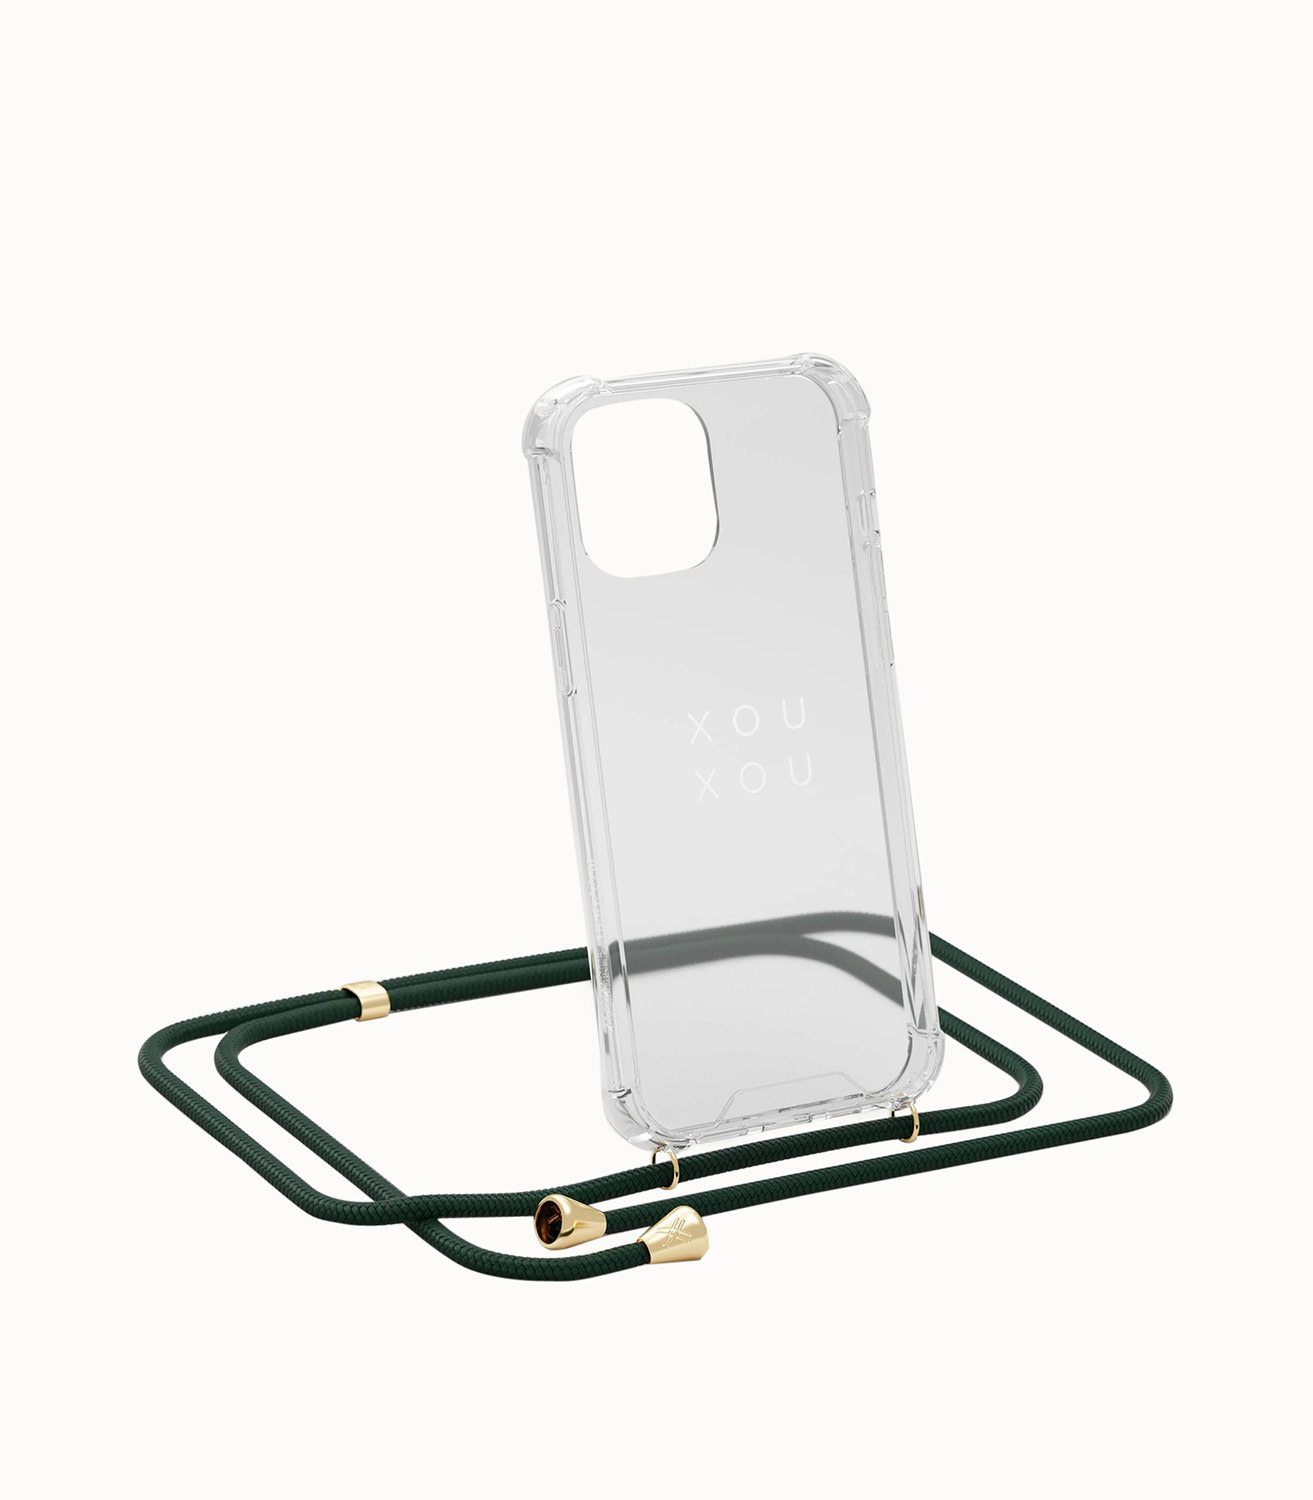 Xouxou Iphone 12 Mini Case Color Green Playground